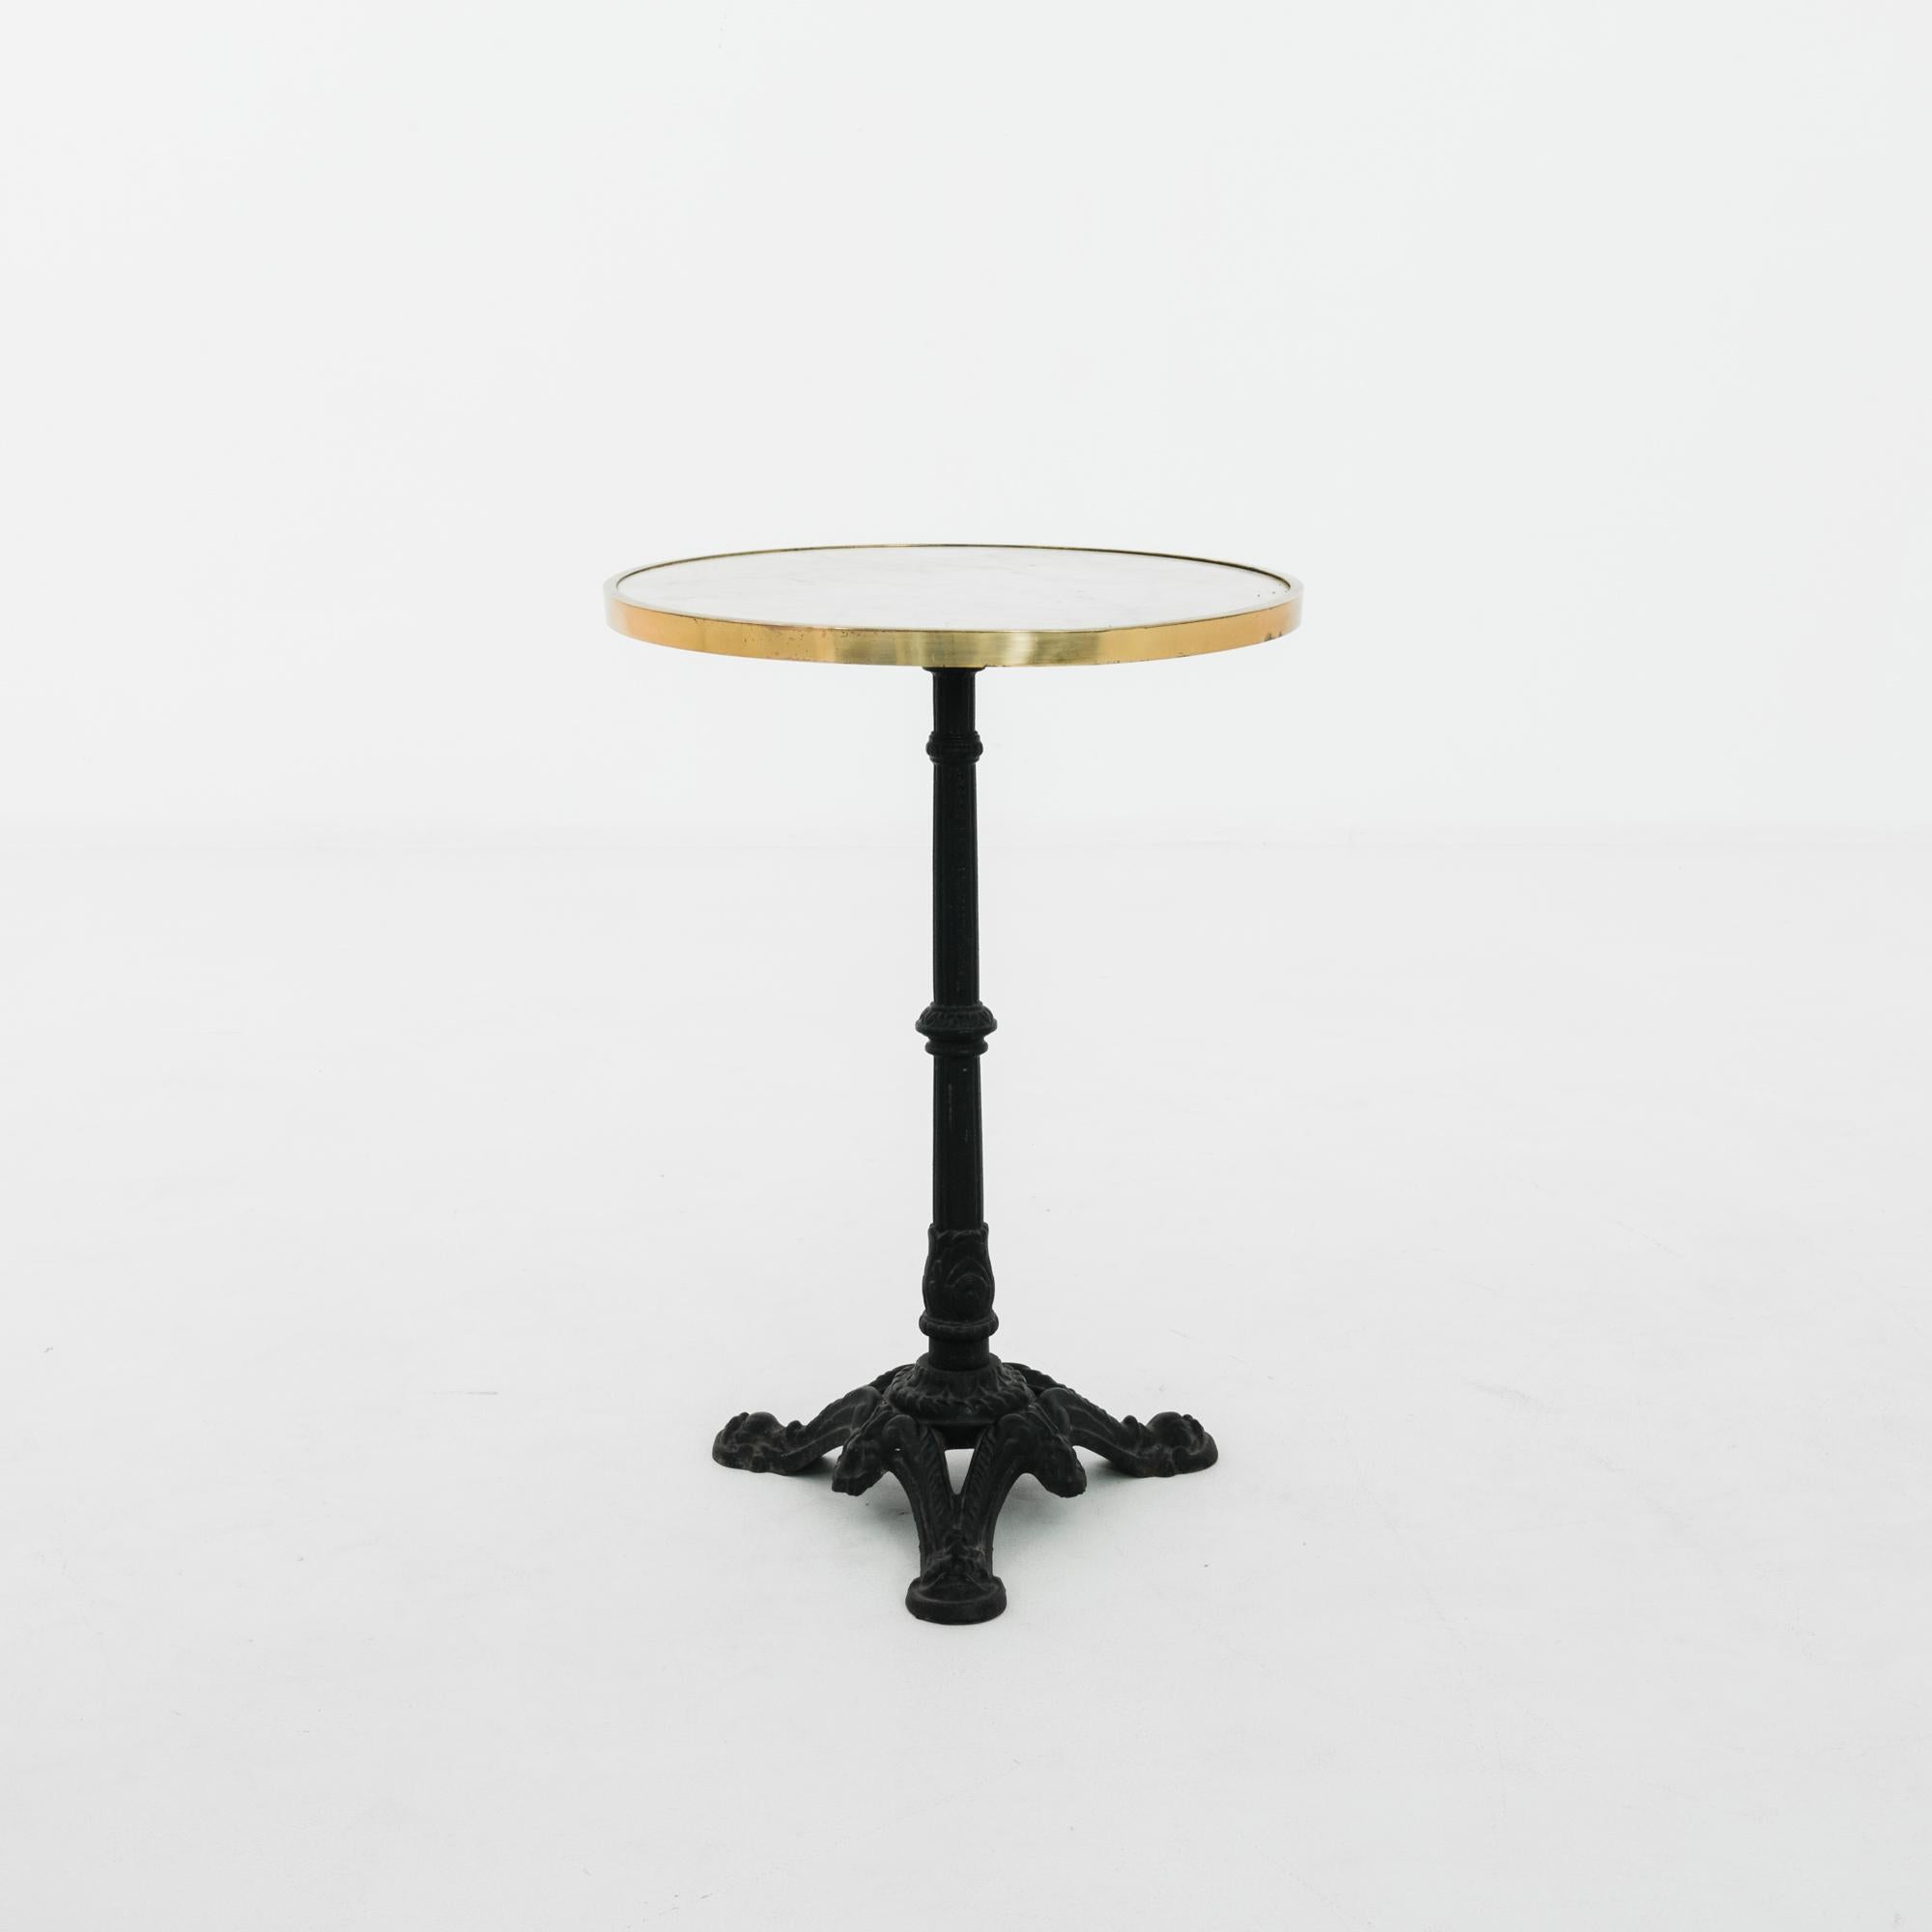 French Provincial 1960s French Cast Iron Brasserie Table with Marble Top